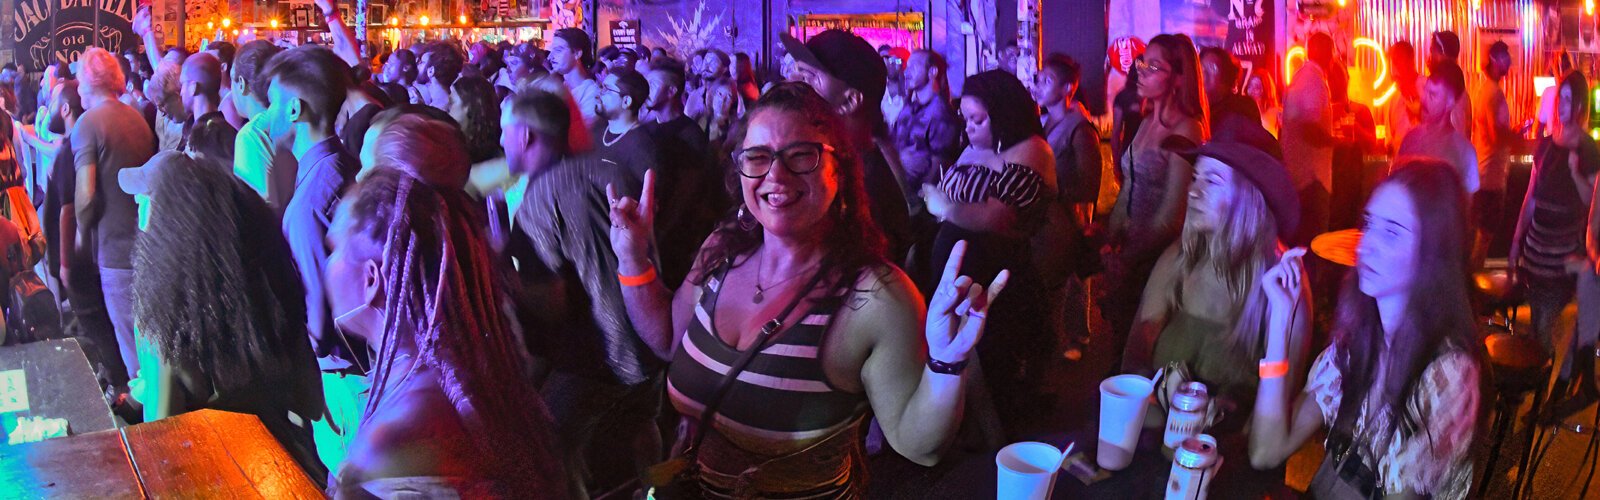 Ybor City’s Crowbar was packed inside and outside for the seventh Vibes of the Bay festival, which presented music across a wide range of genres as well as vendors, food and drinks.